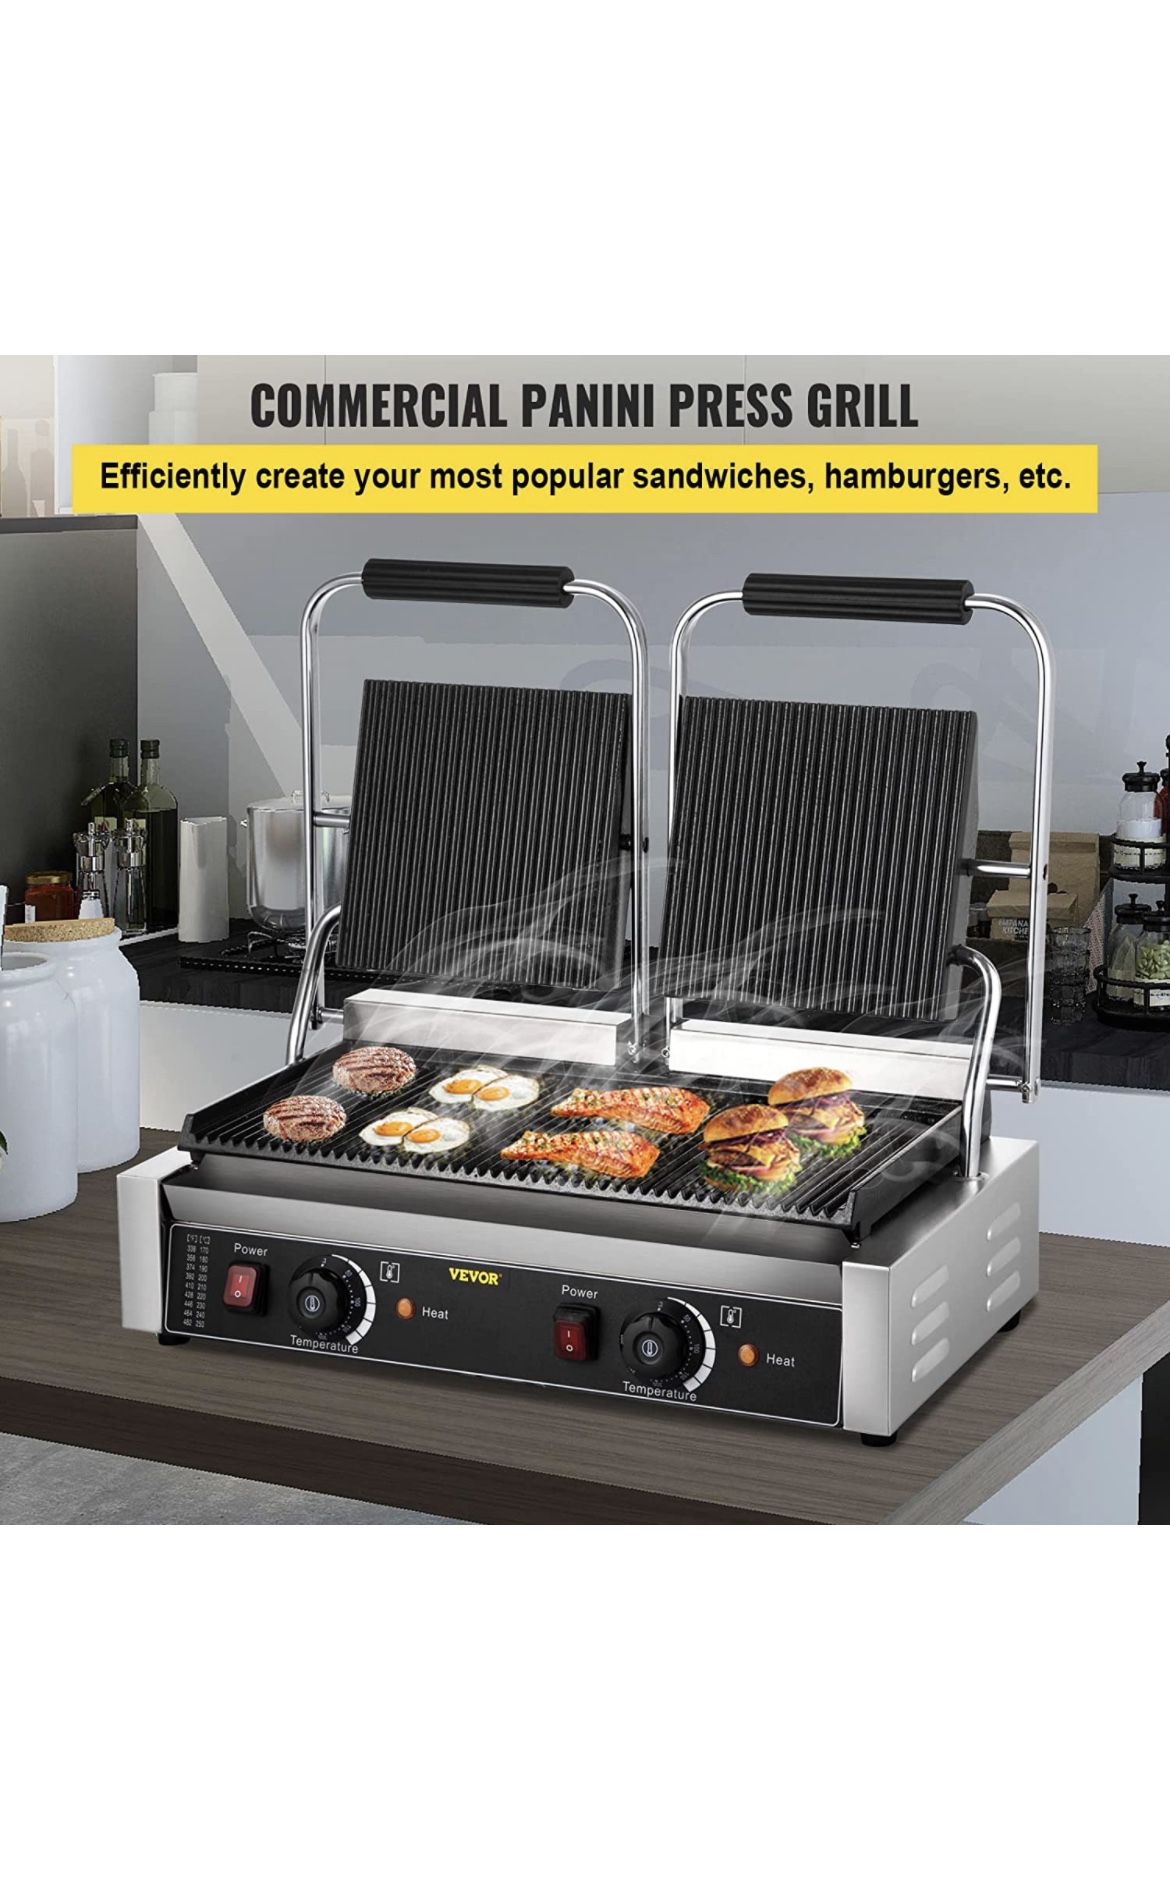 23- 4 Happybuy 110V Commercial Sandwich Panini Press Grill 2X1800W Temperature Control 122°F-572°F Commercial Panini Grill for Hamburgers Steaks Baco